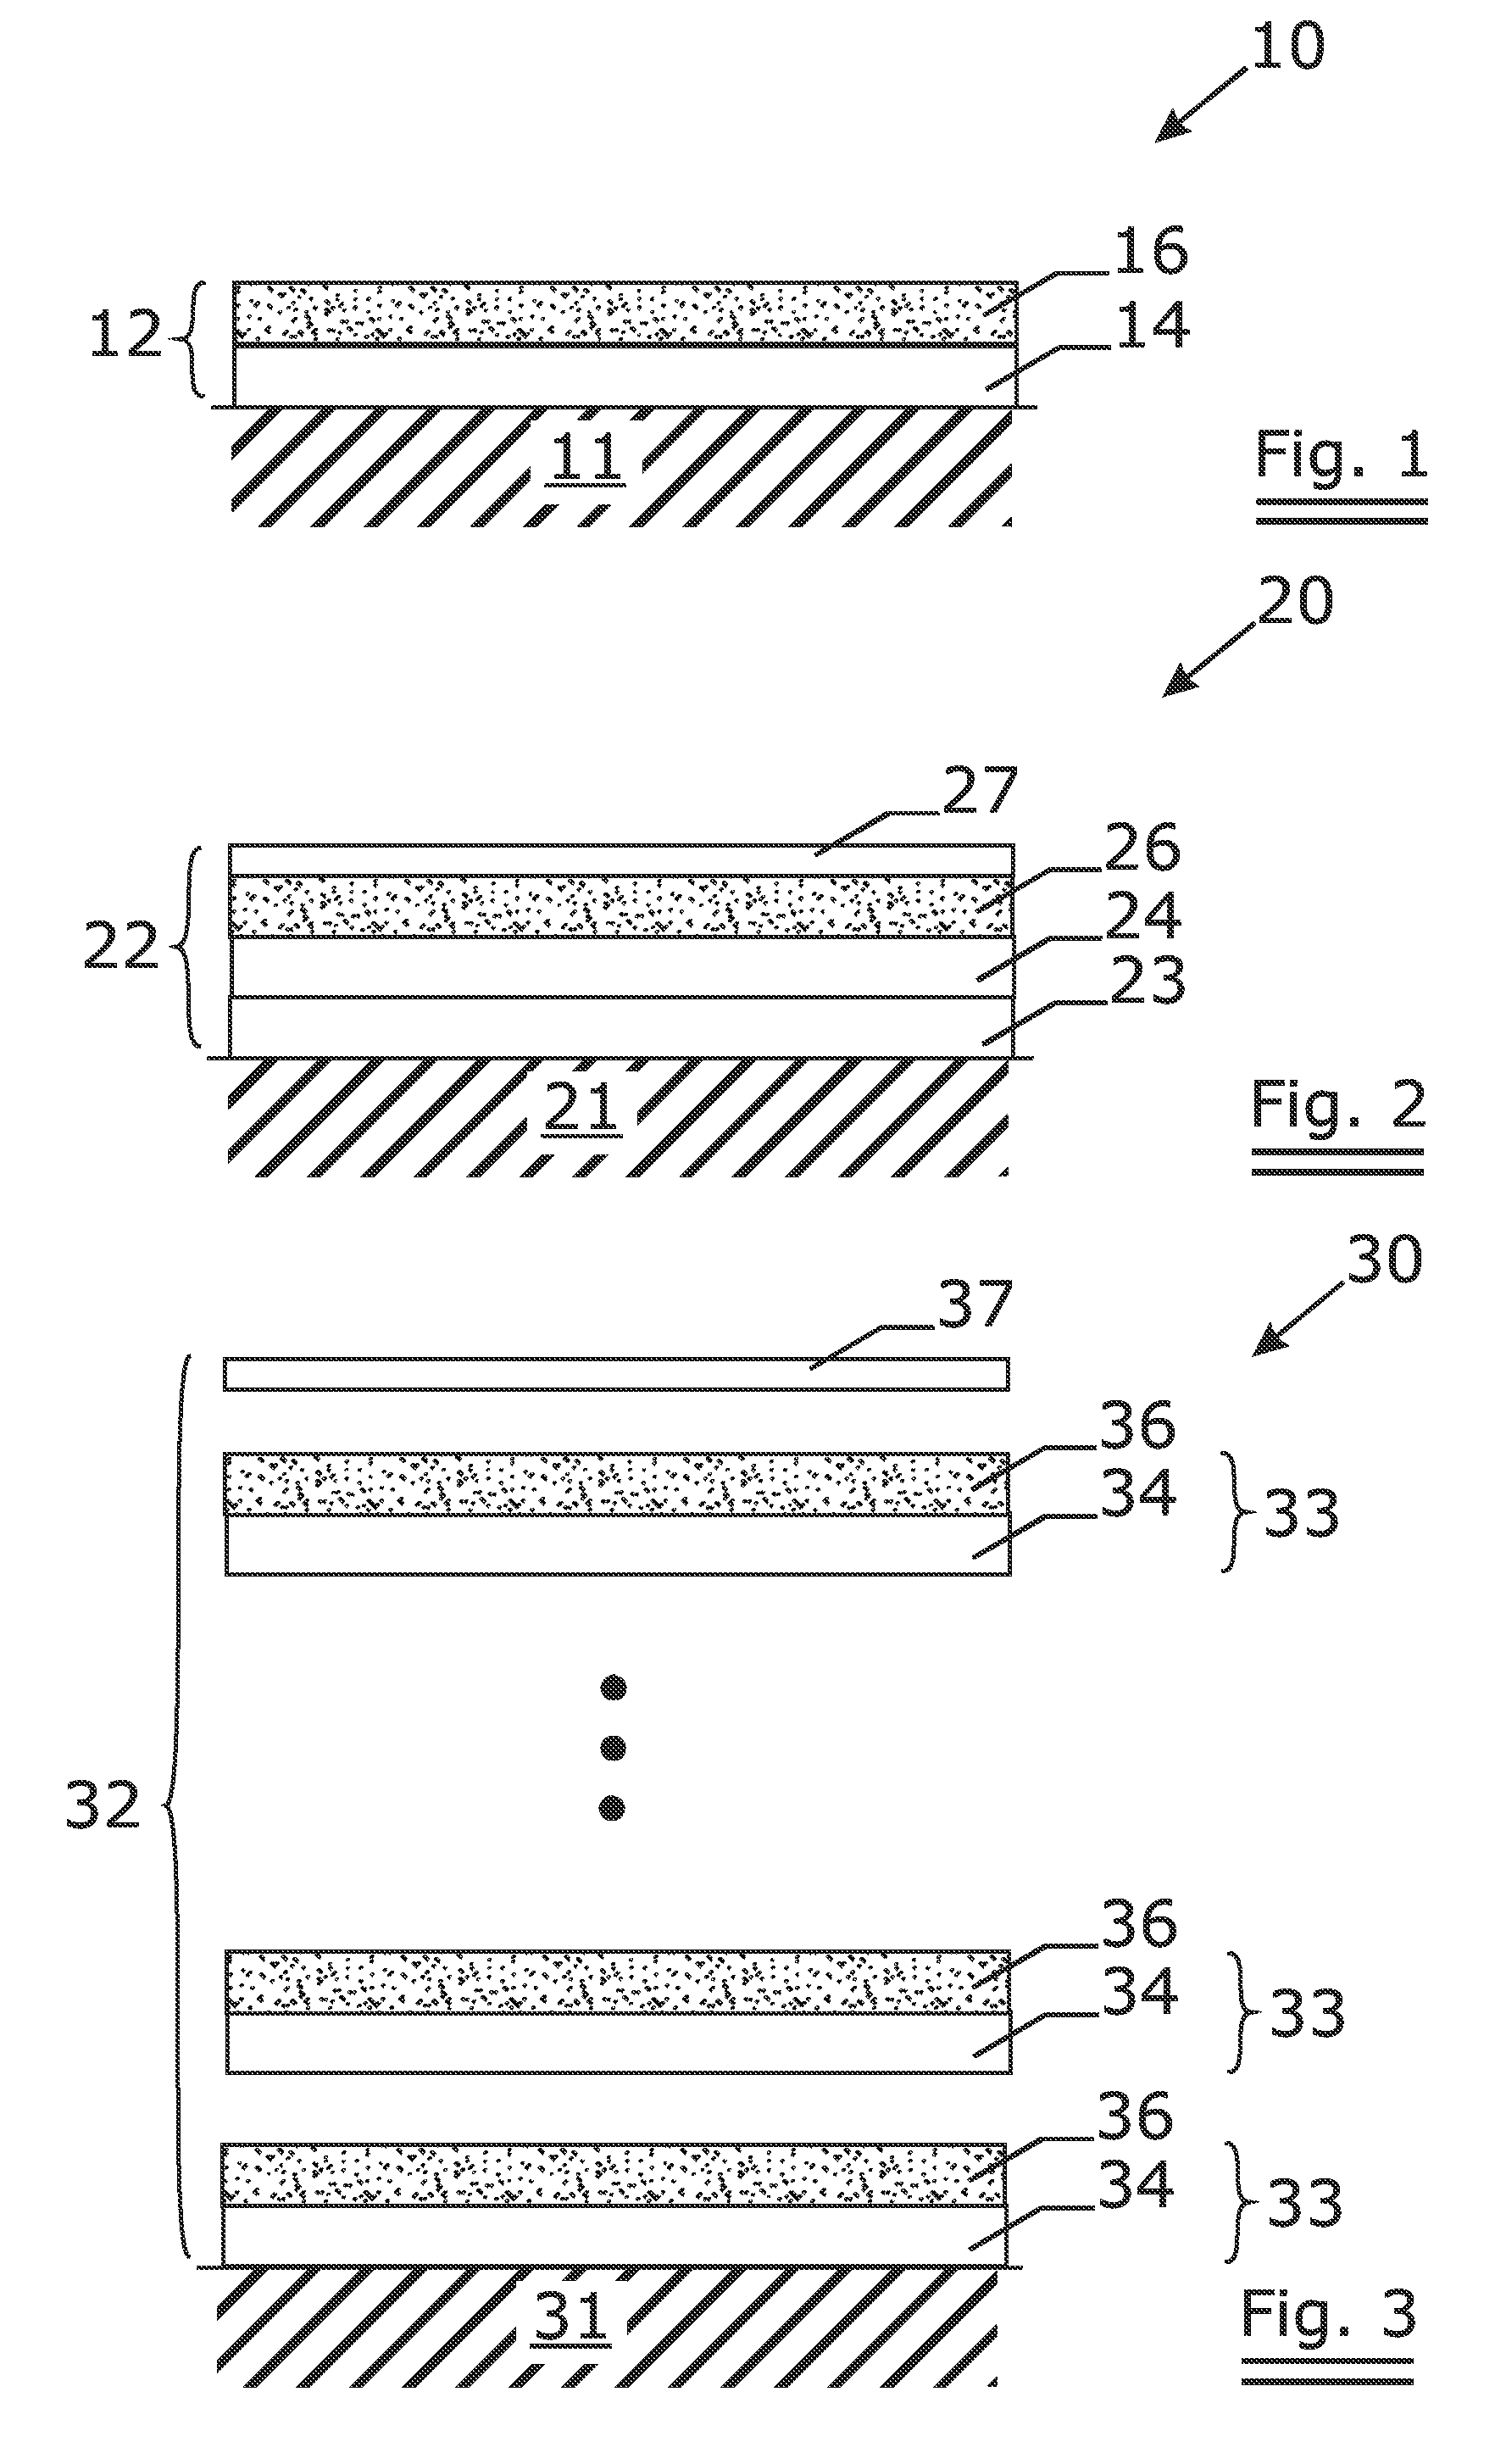 Substrate coated with a layered structure comprising a tetrahedral carbon coating